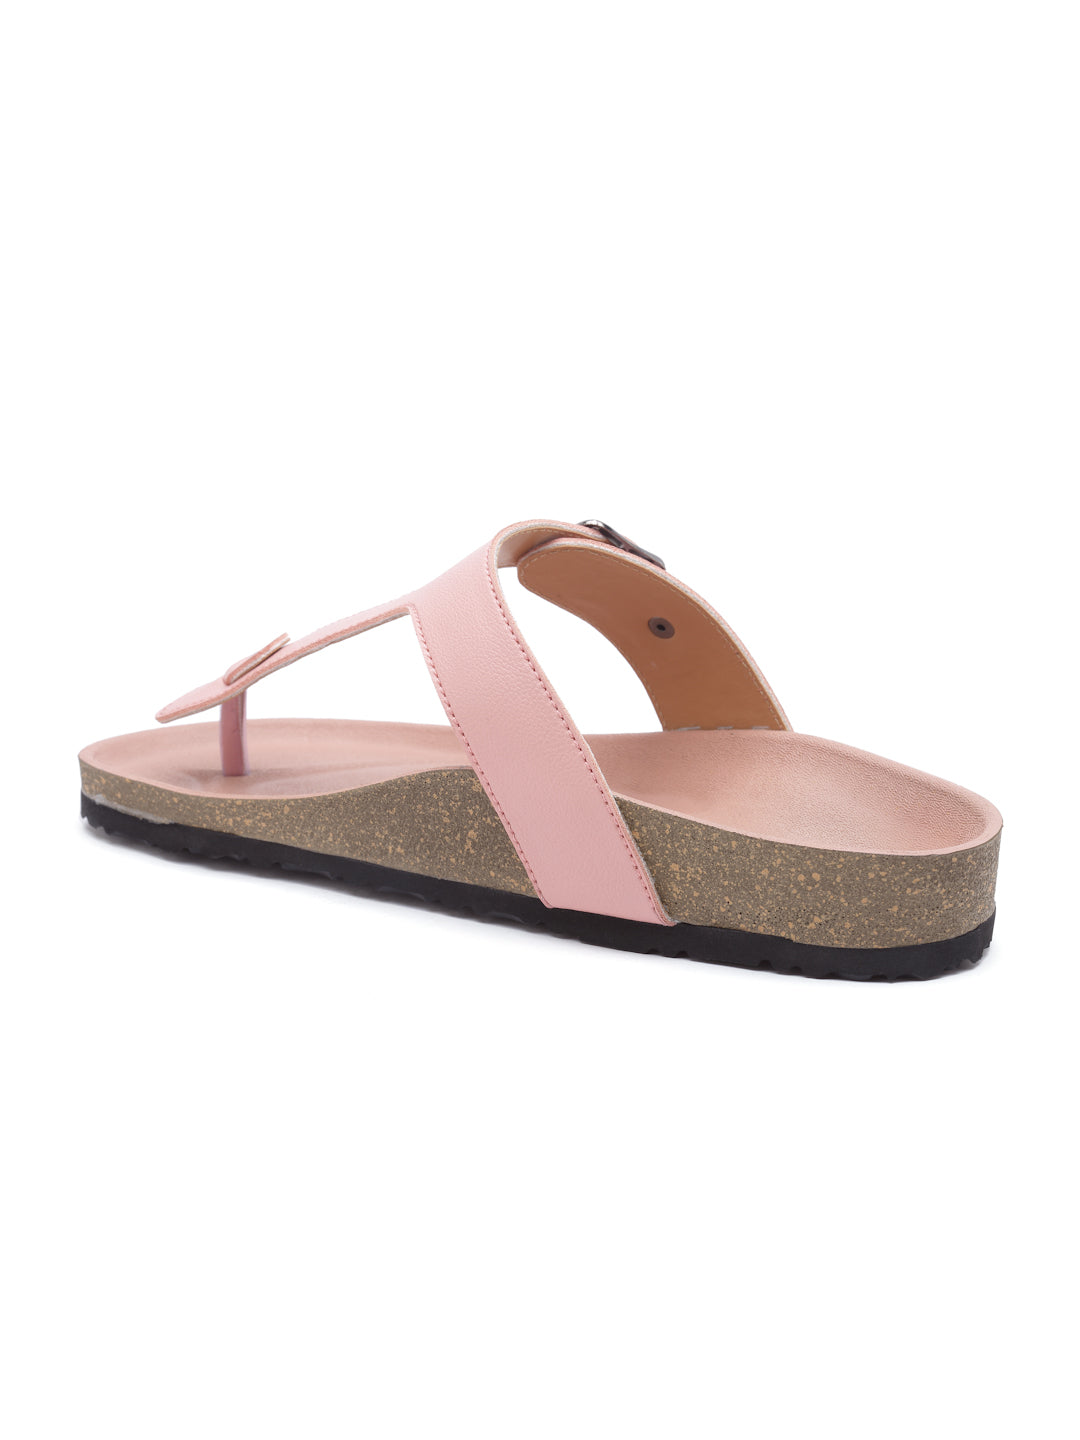 Women's Outdoor Stylish Pink Synthetic Leather Casual Sandal